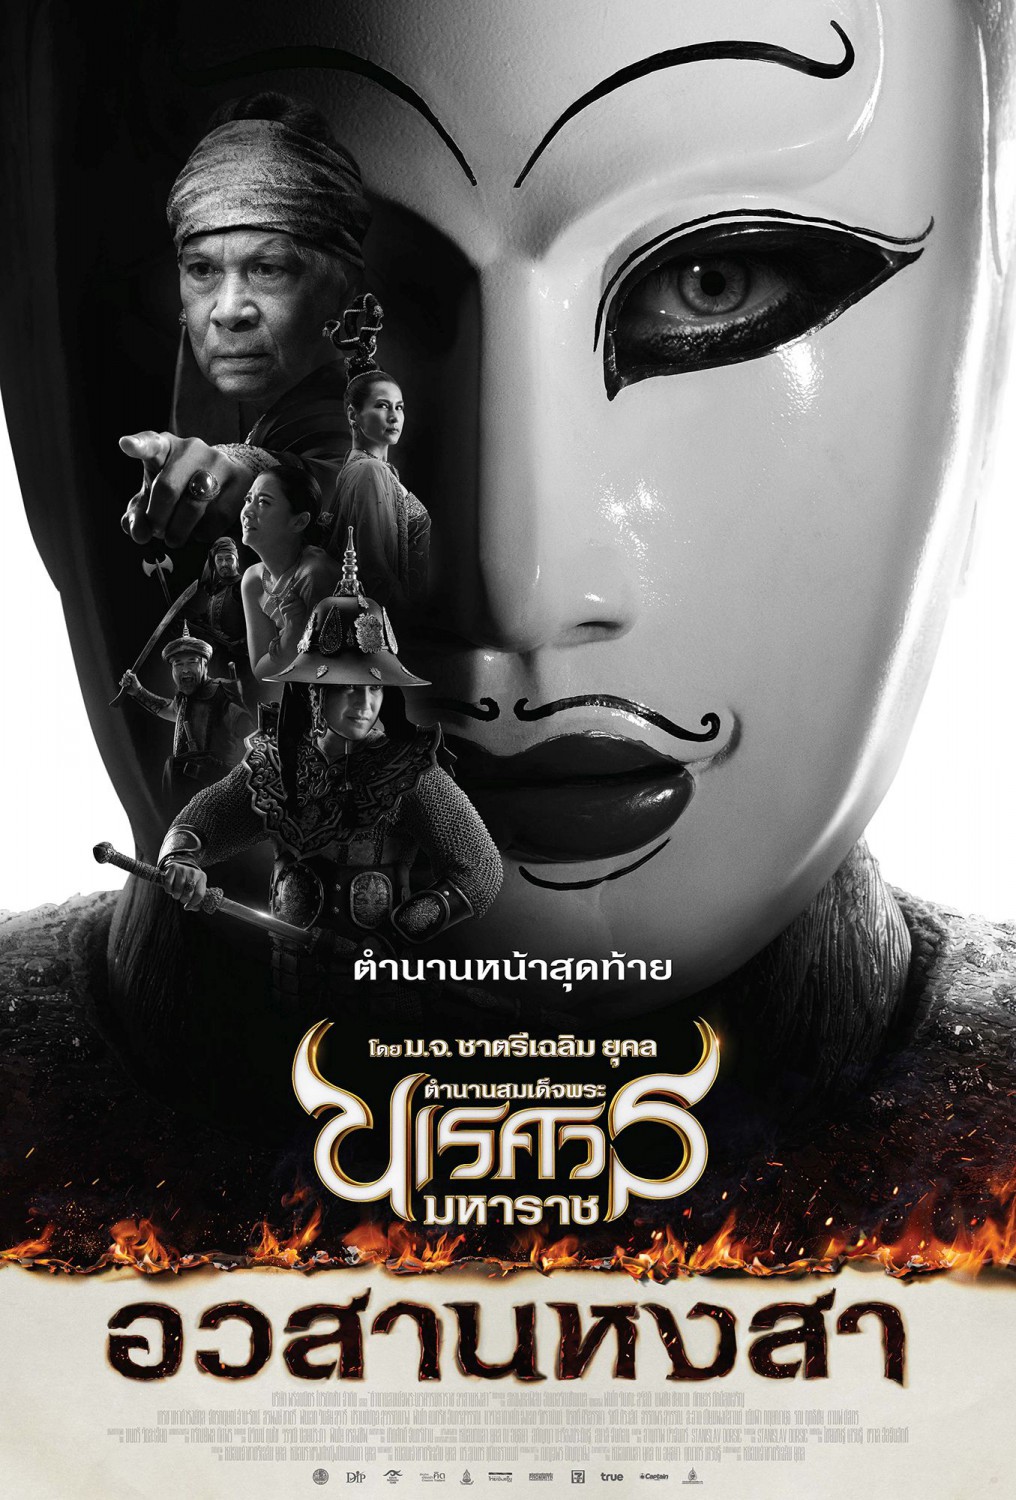 Extra Large Movie Poster Image for King Naresuan 6 (#12 of 12)